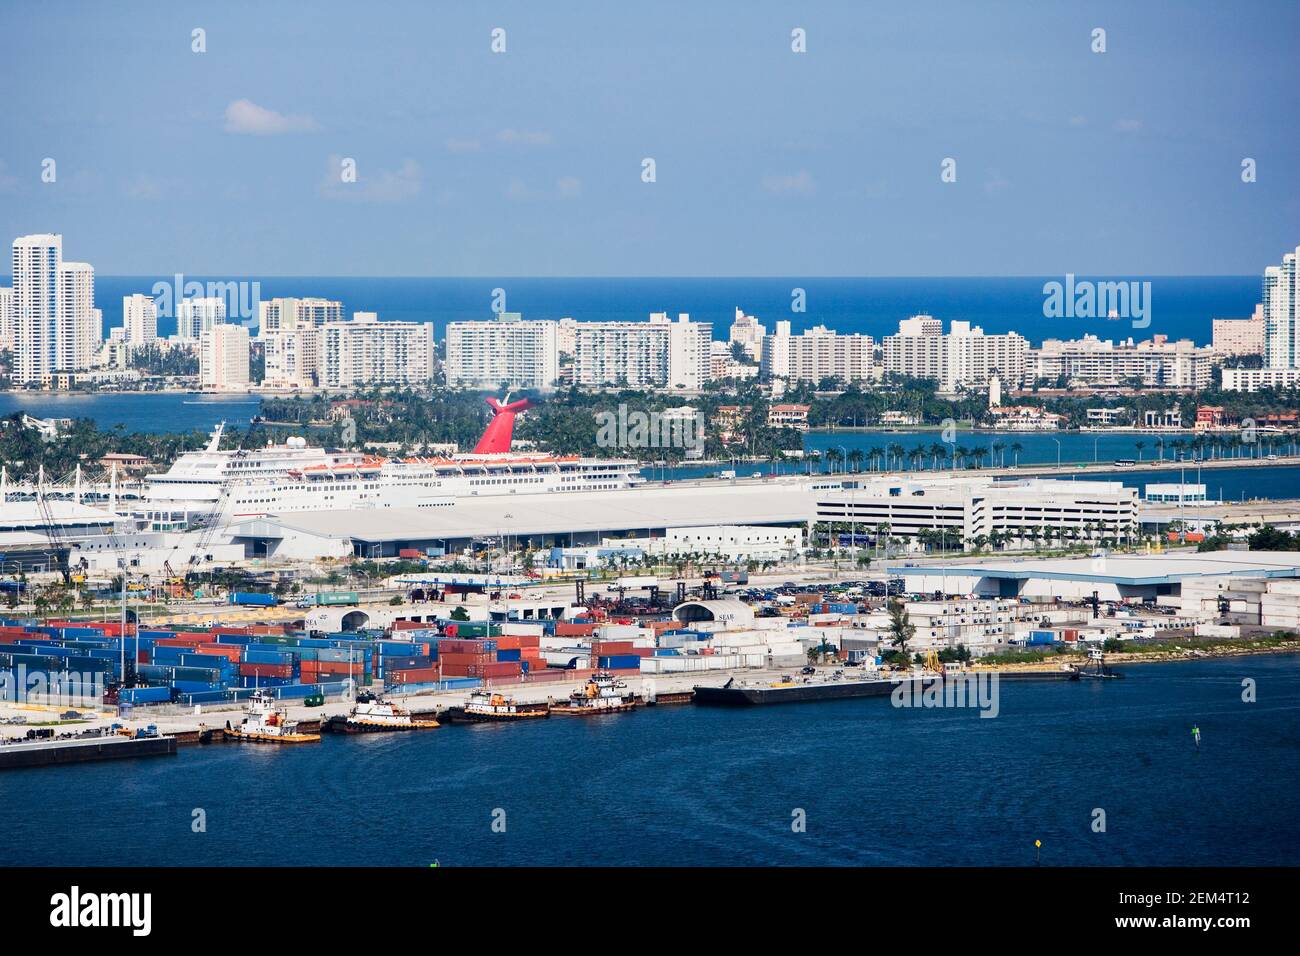 Aerial view of buildings in a city by the sea, Miami, Florida State, USA Stock Photo